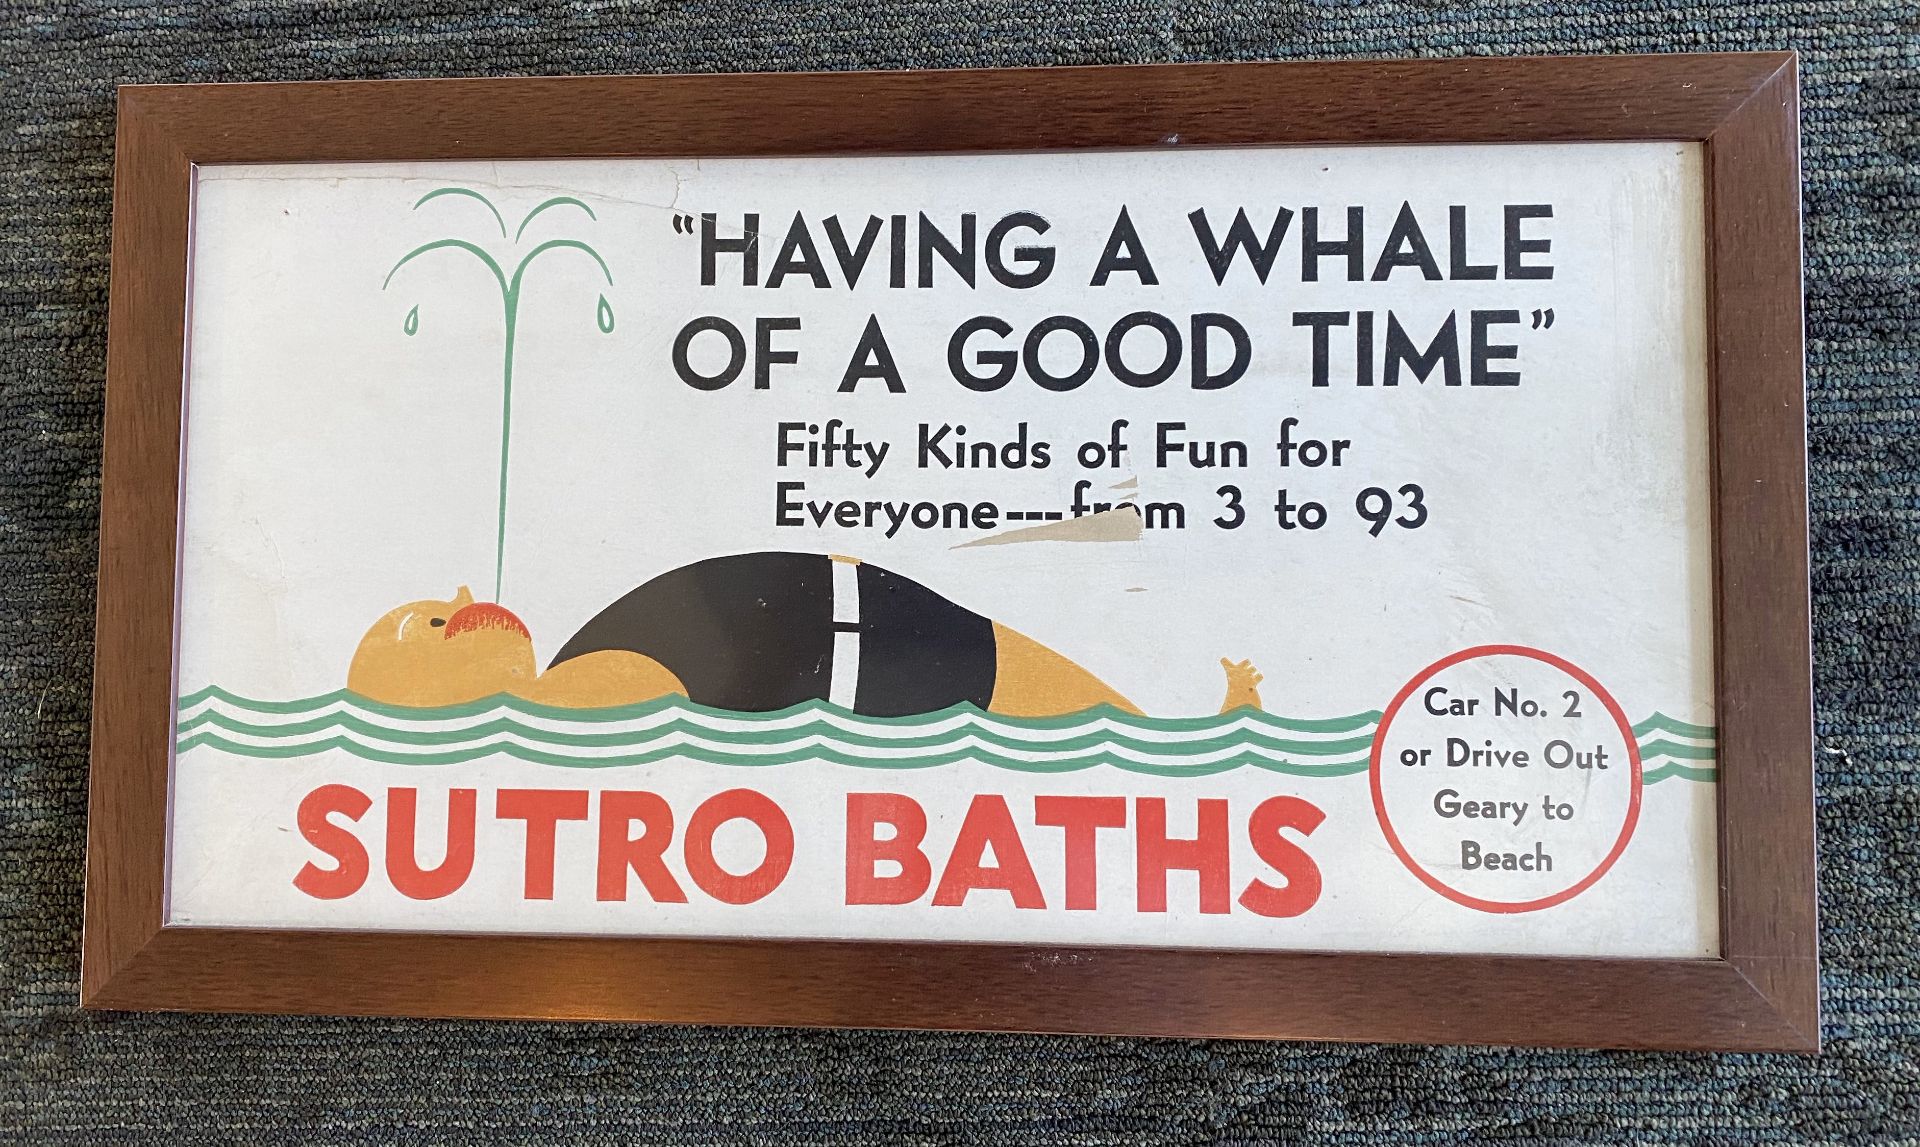 "Having a Whale of a Good Time" Sutro Baths Poster